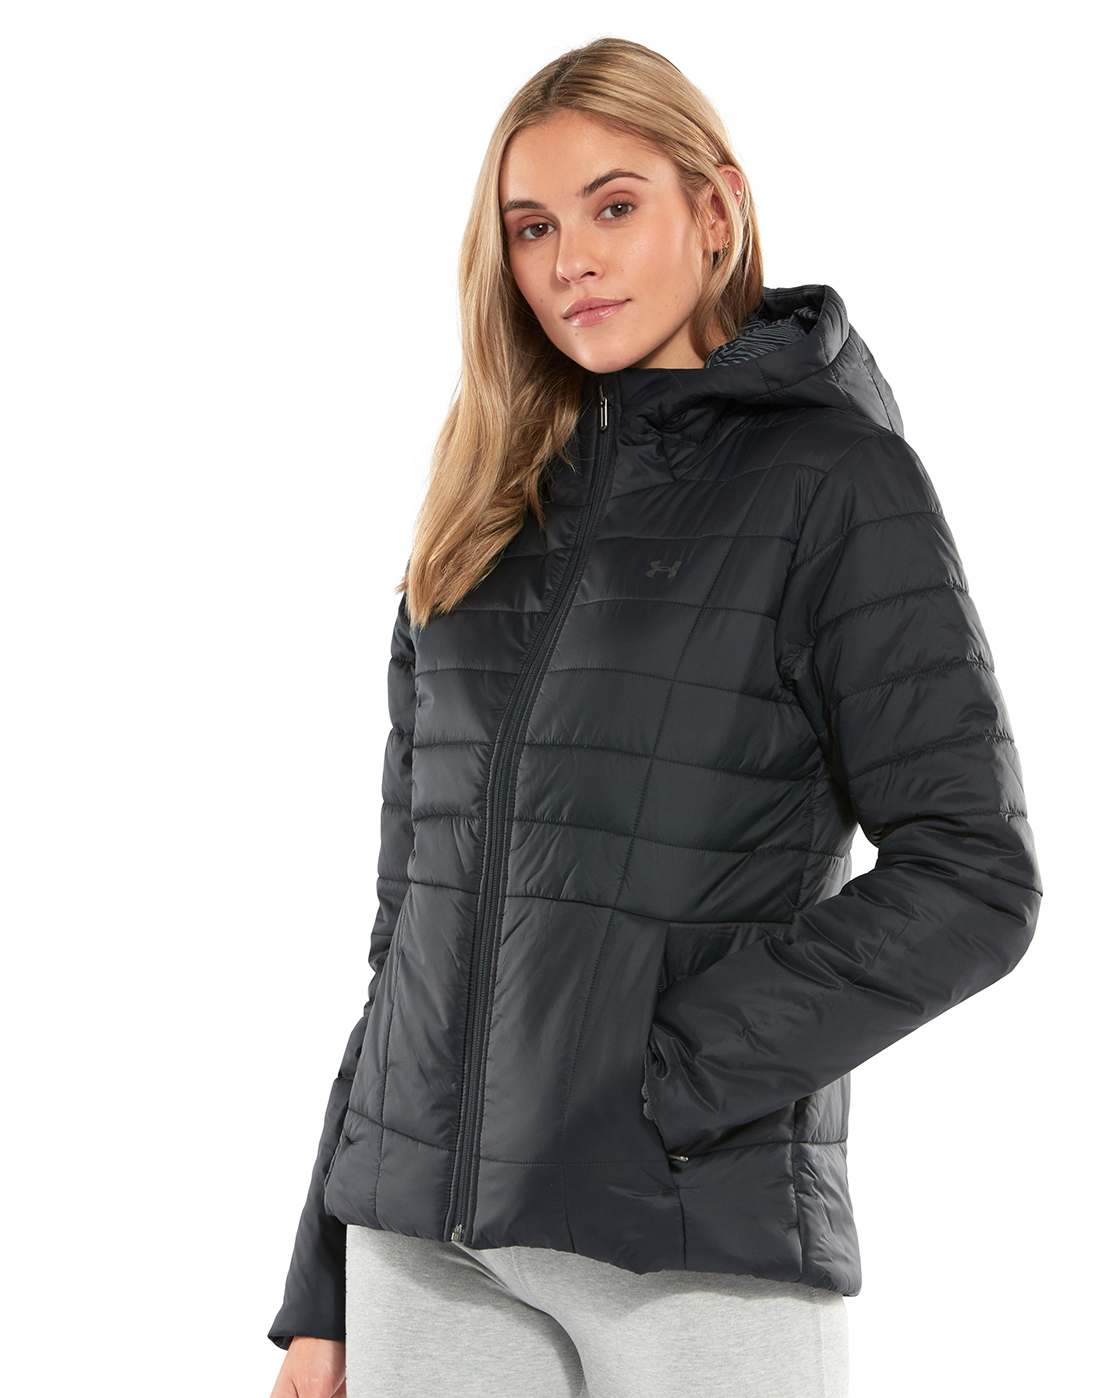 Download Under Armour Womens Insulated Hooded Jacket | Life Style ...